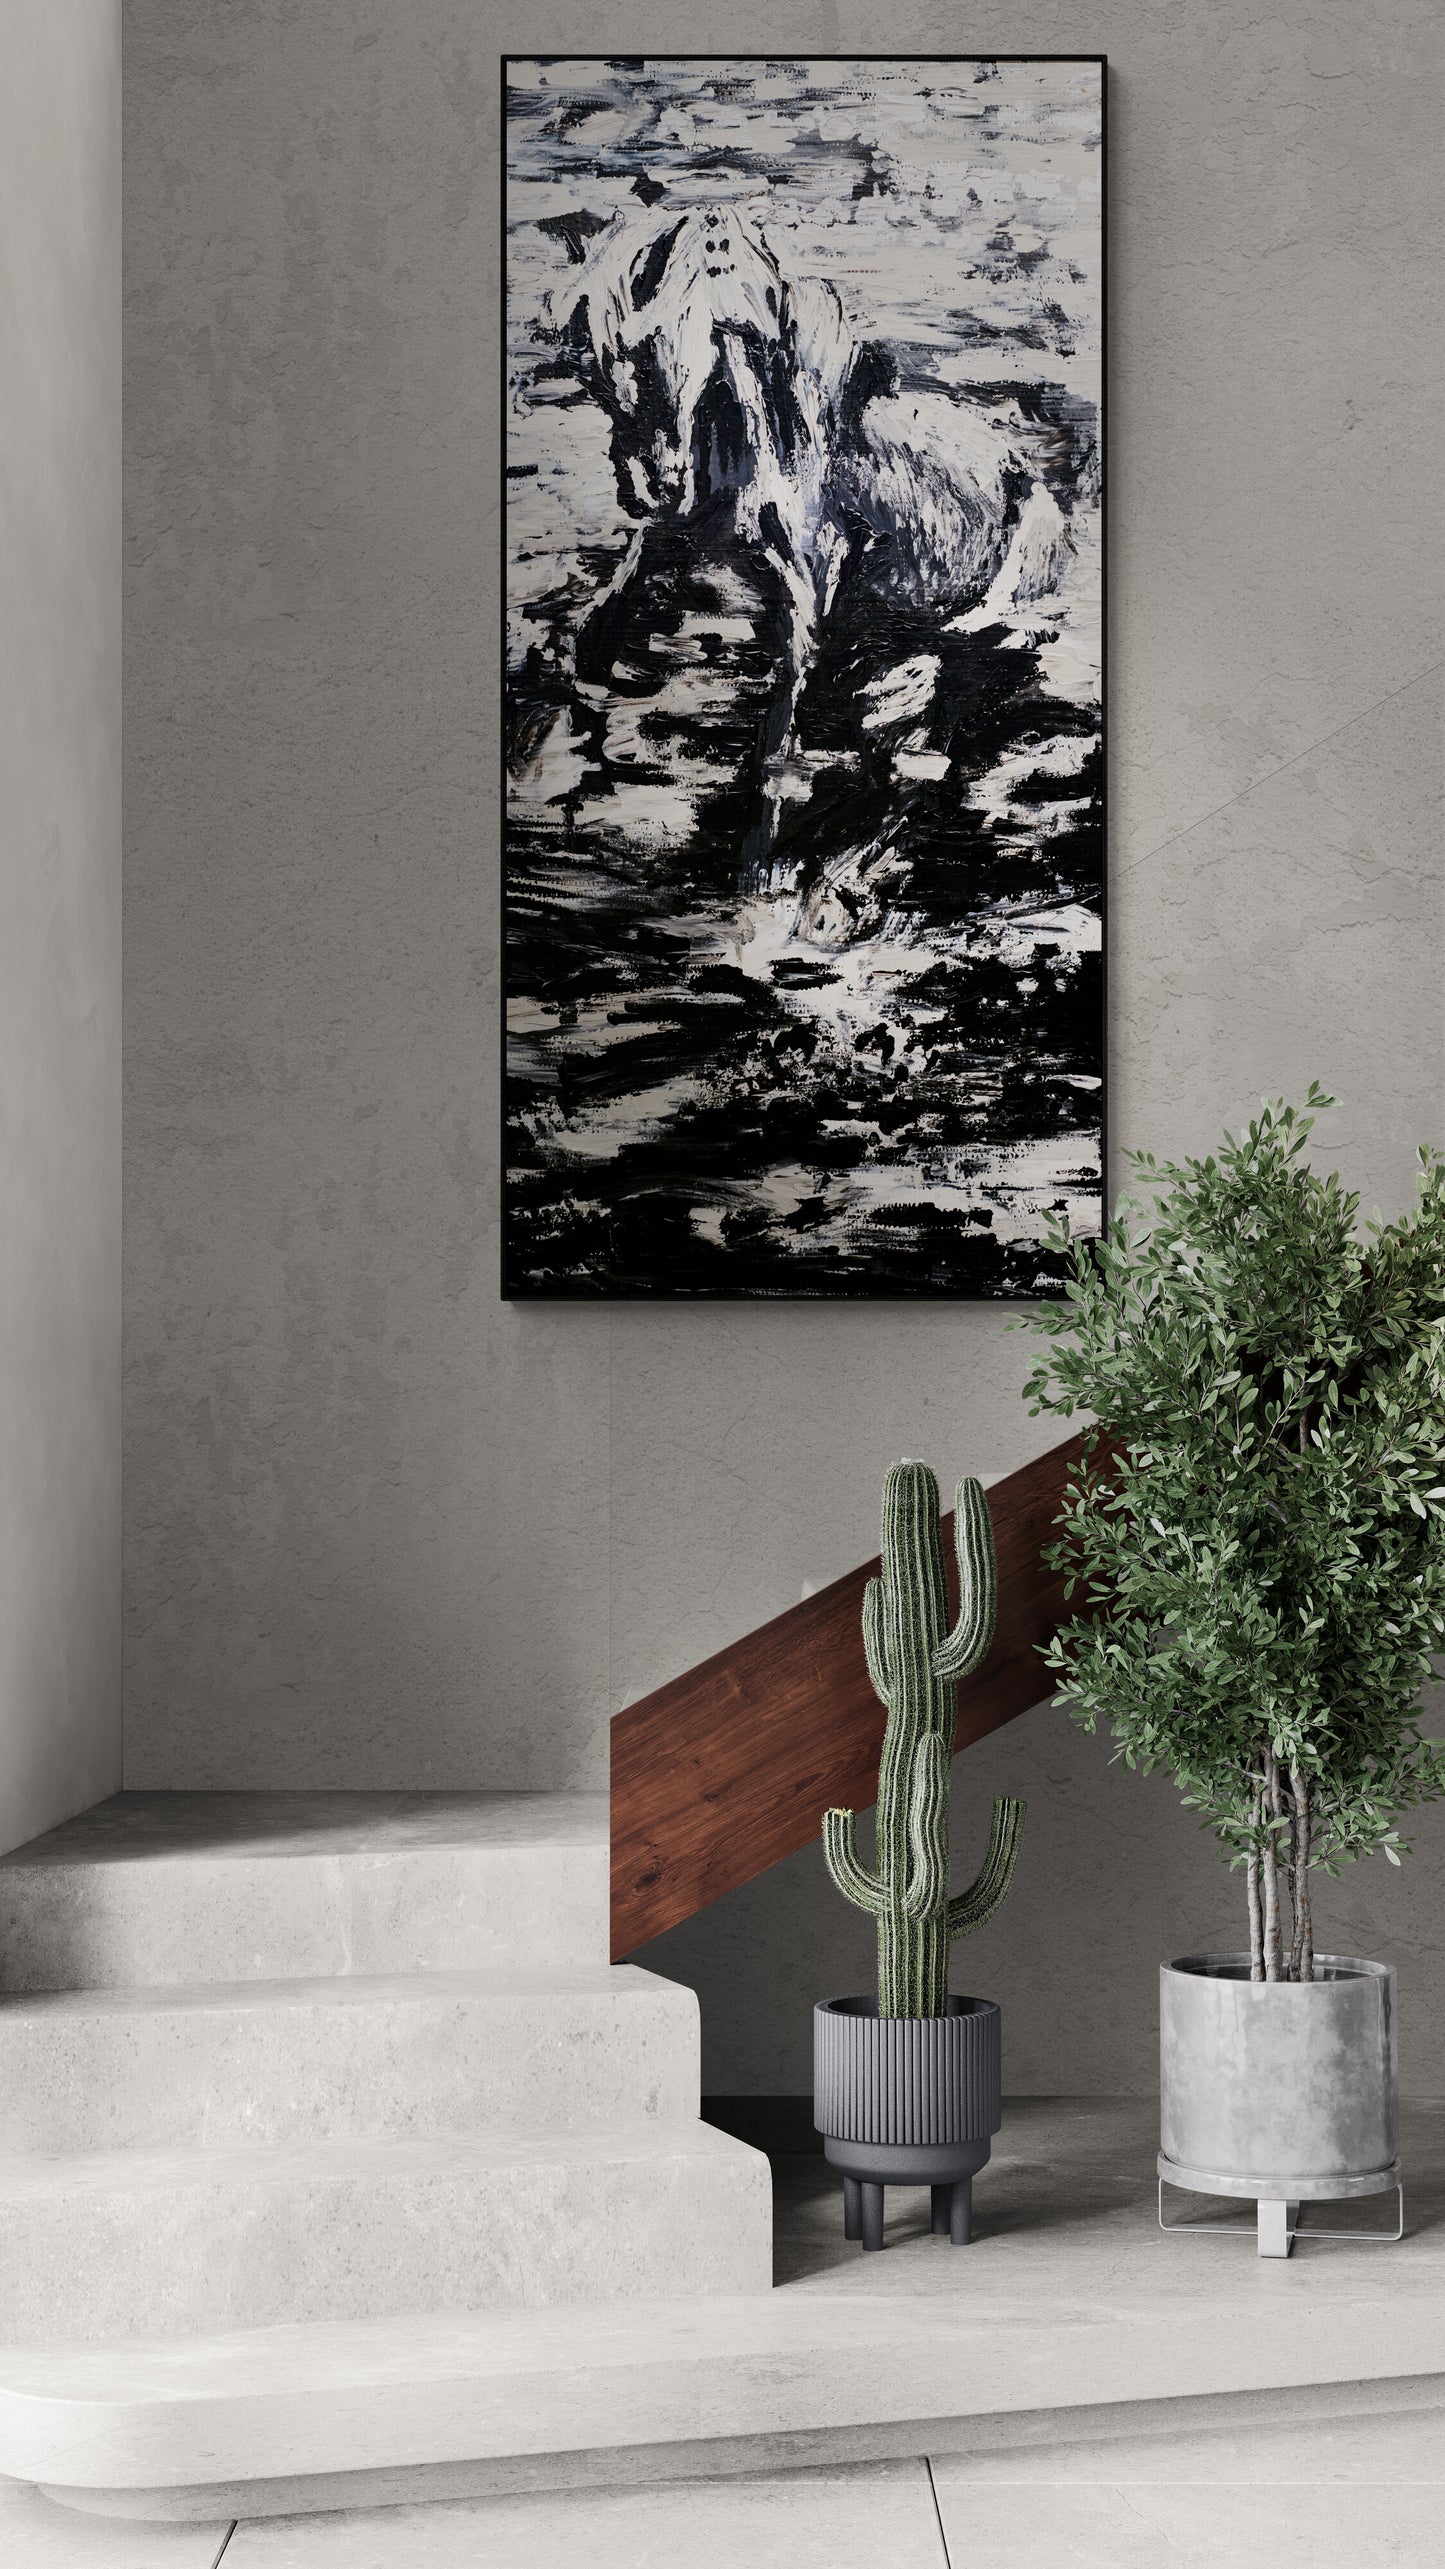 Abstract dancing horse canvas art print with artistic feeling.